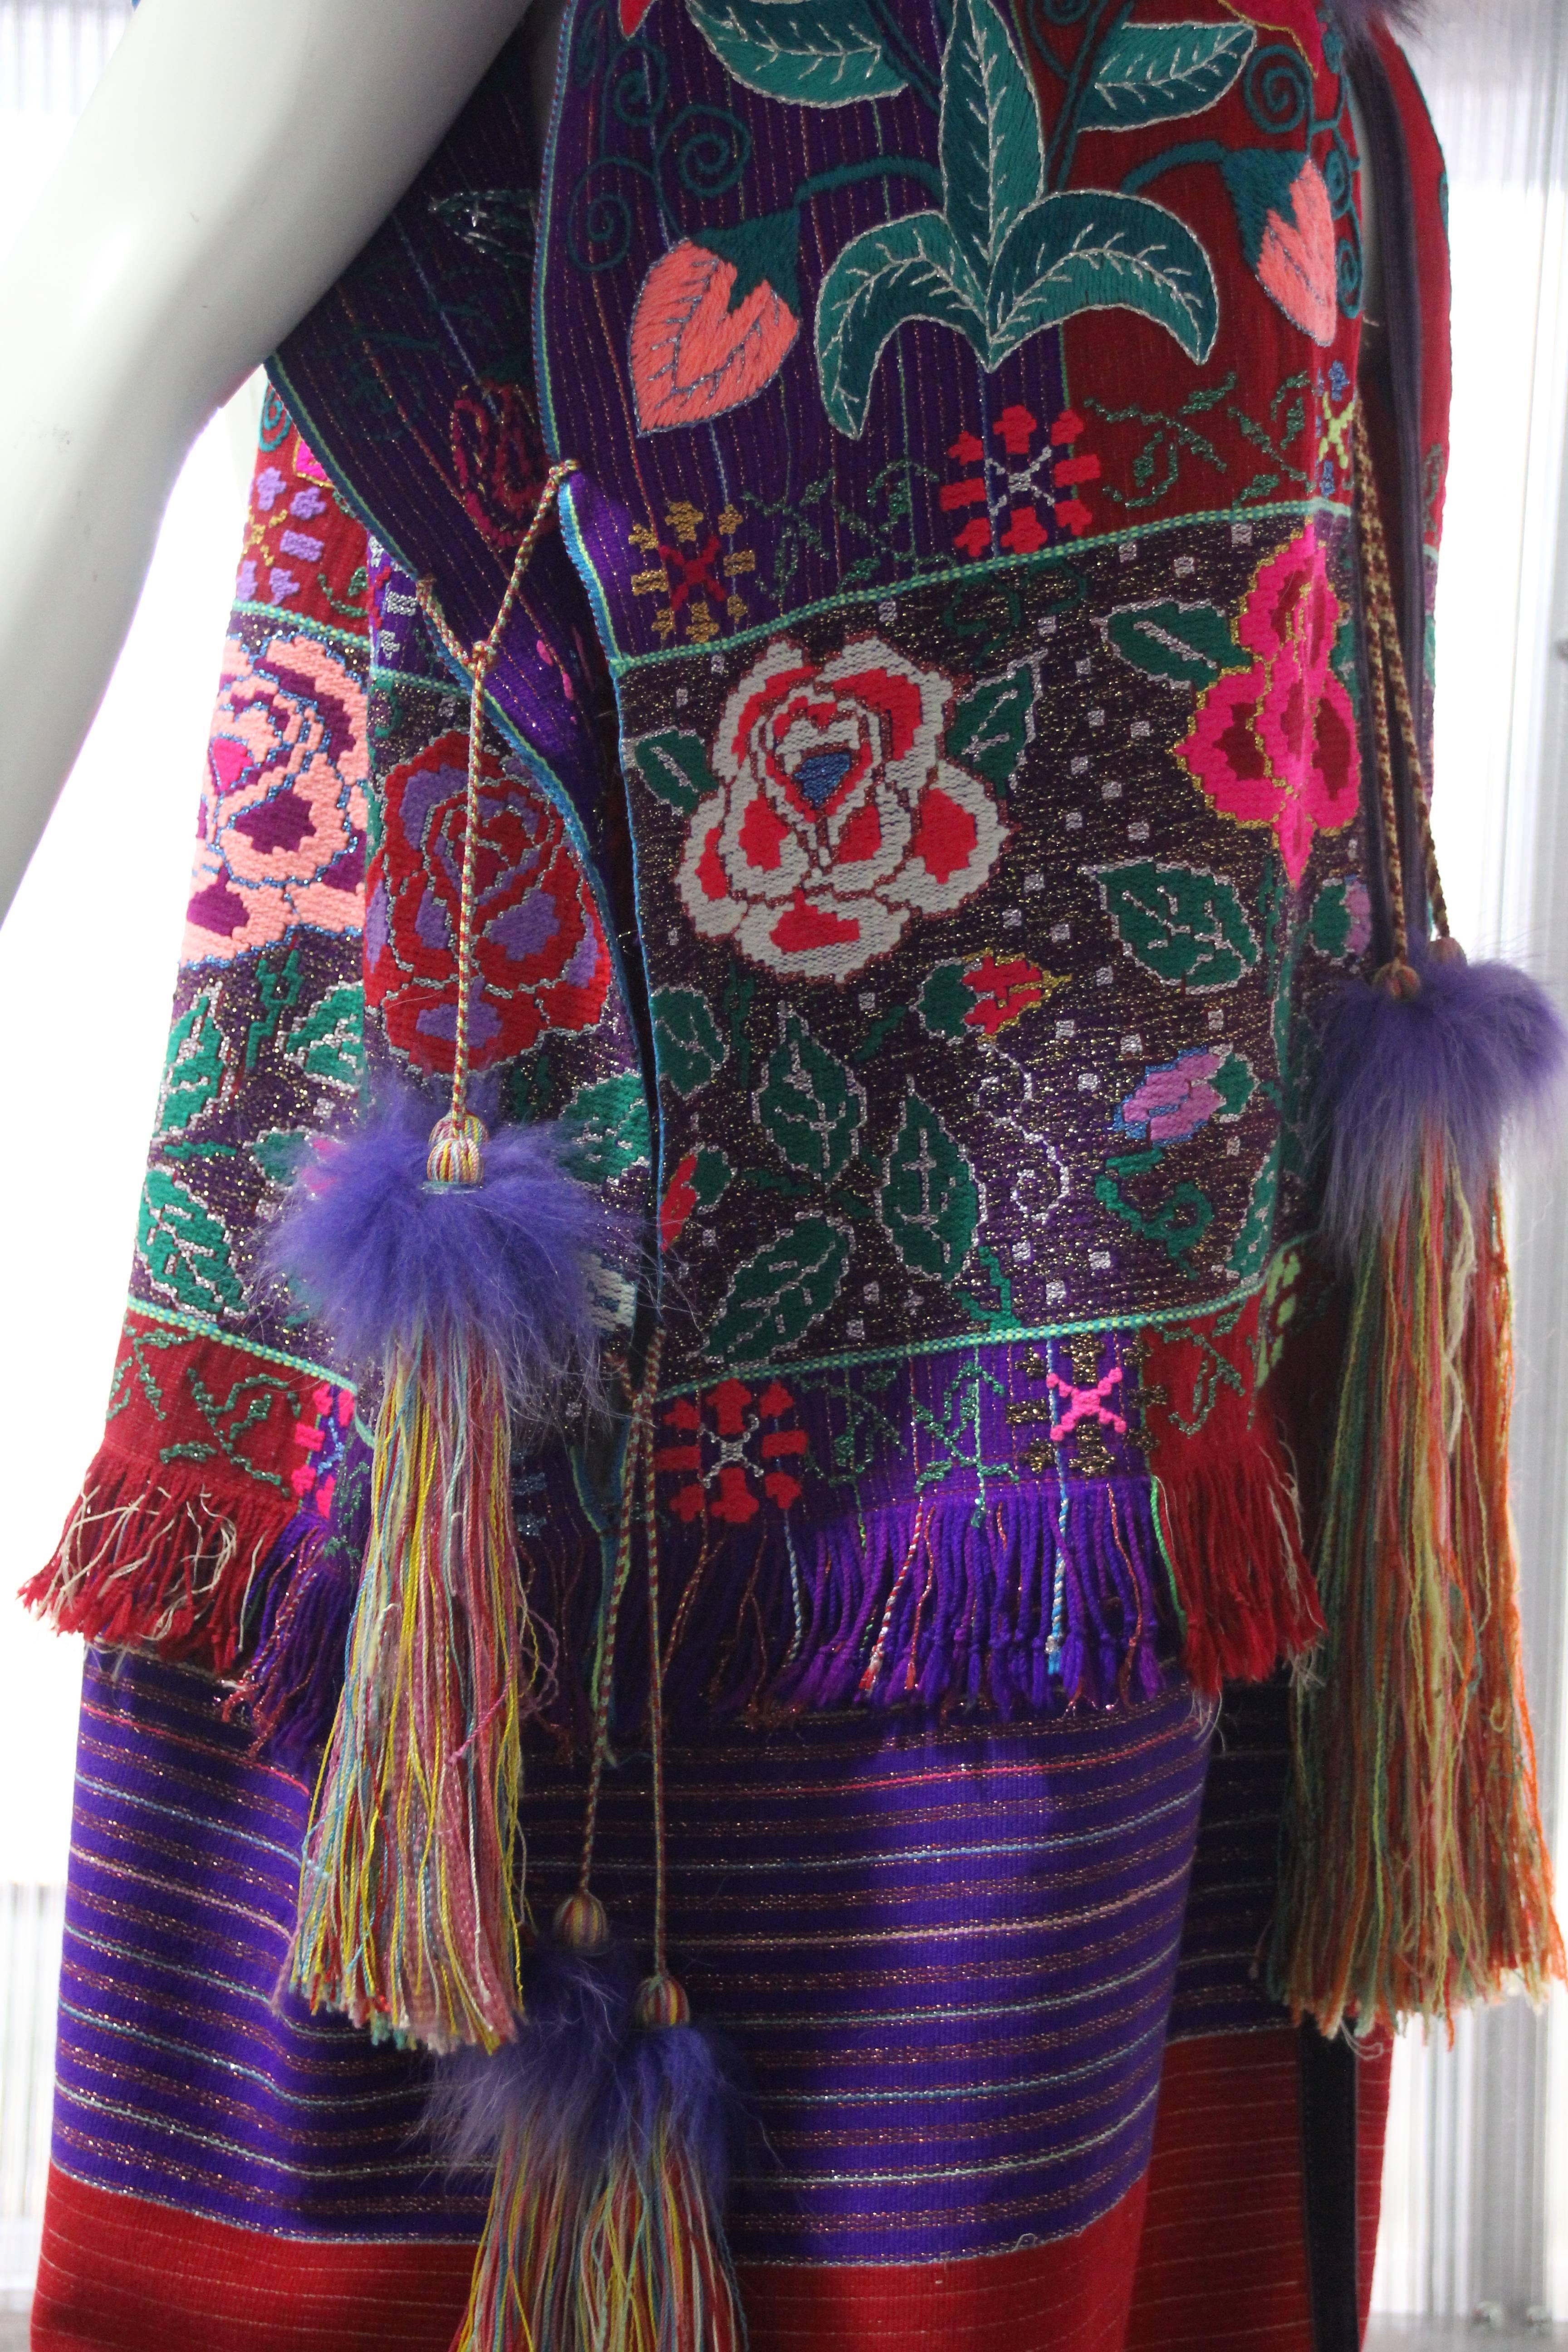 Women's Custom-Made Colorful Folkloric Vestment of Vintage Mexican Textiles and Fox Fur For Sale